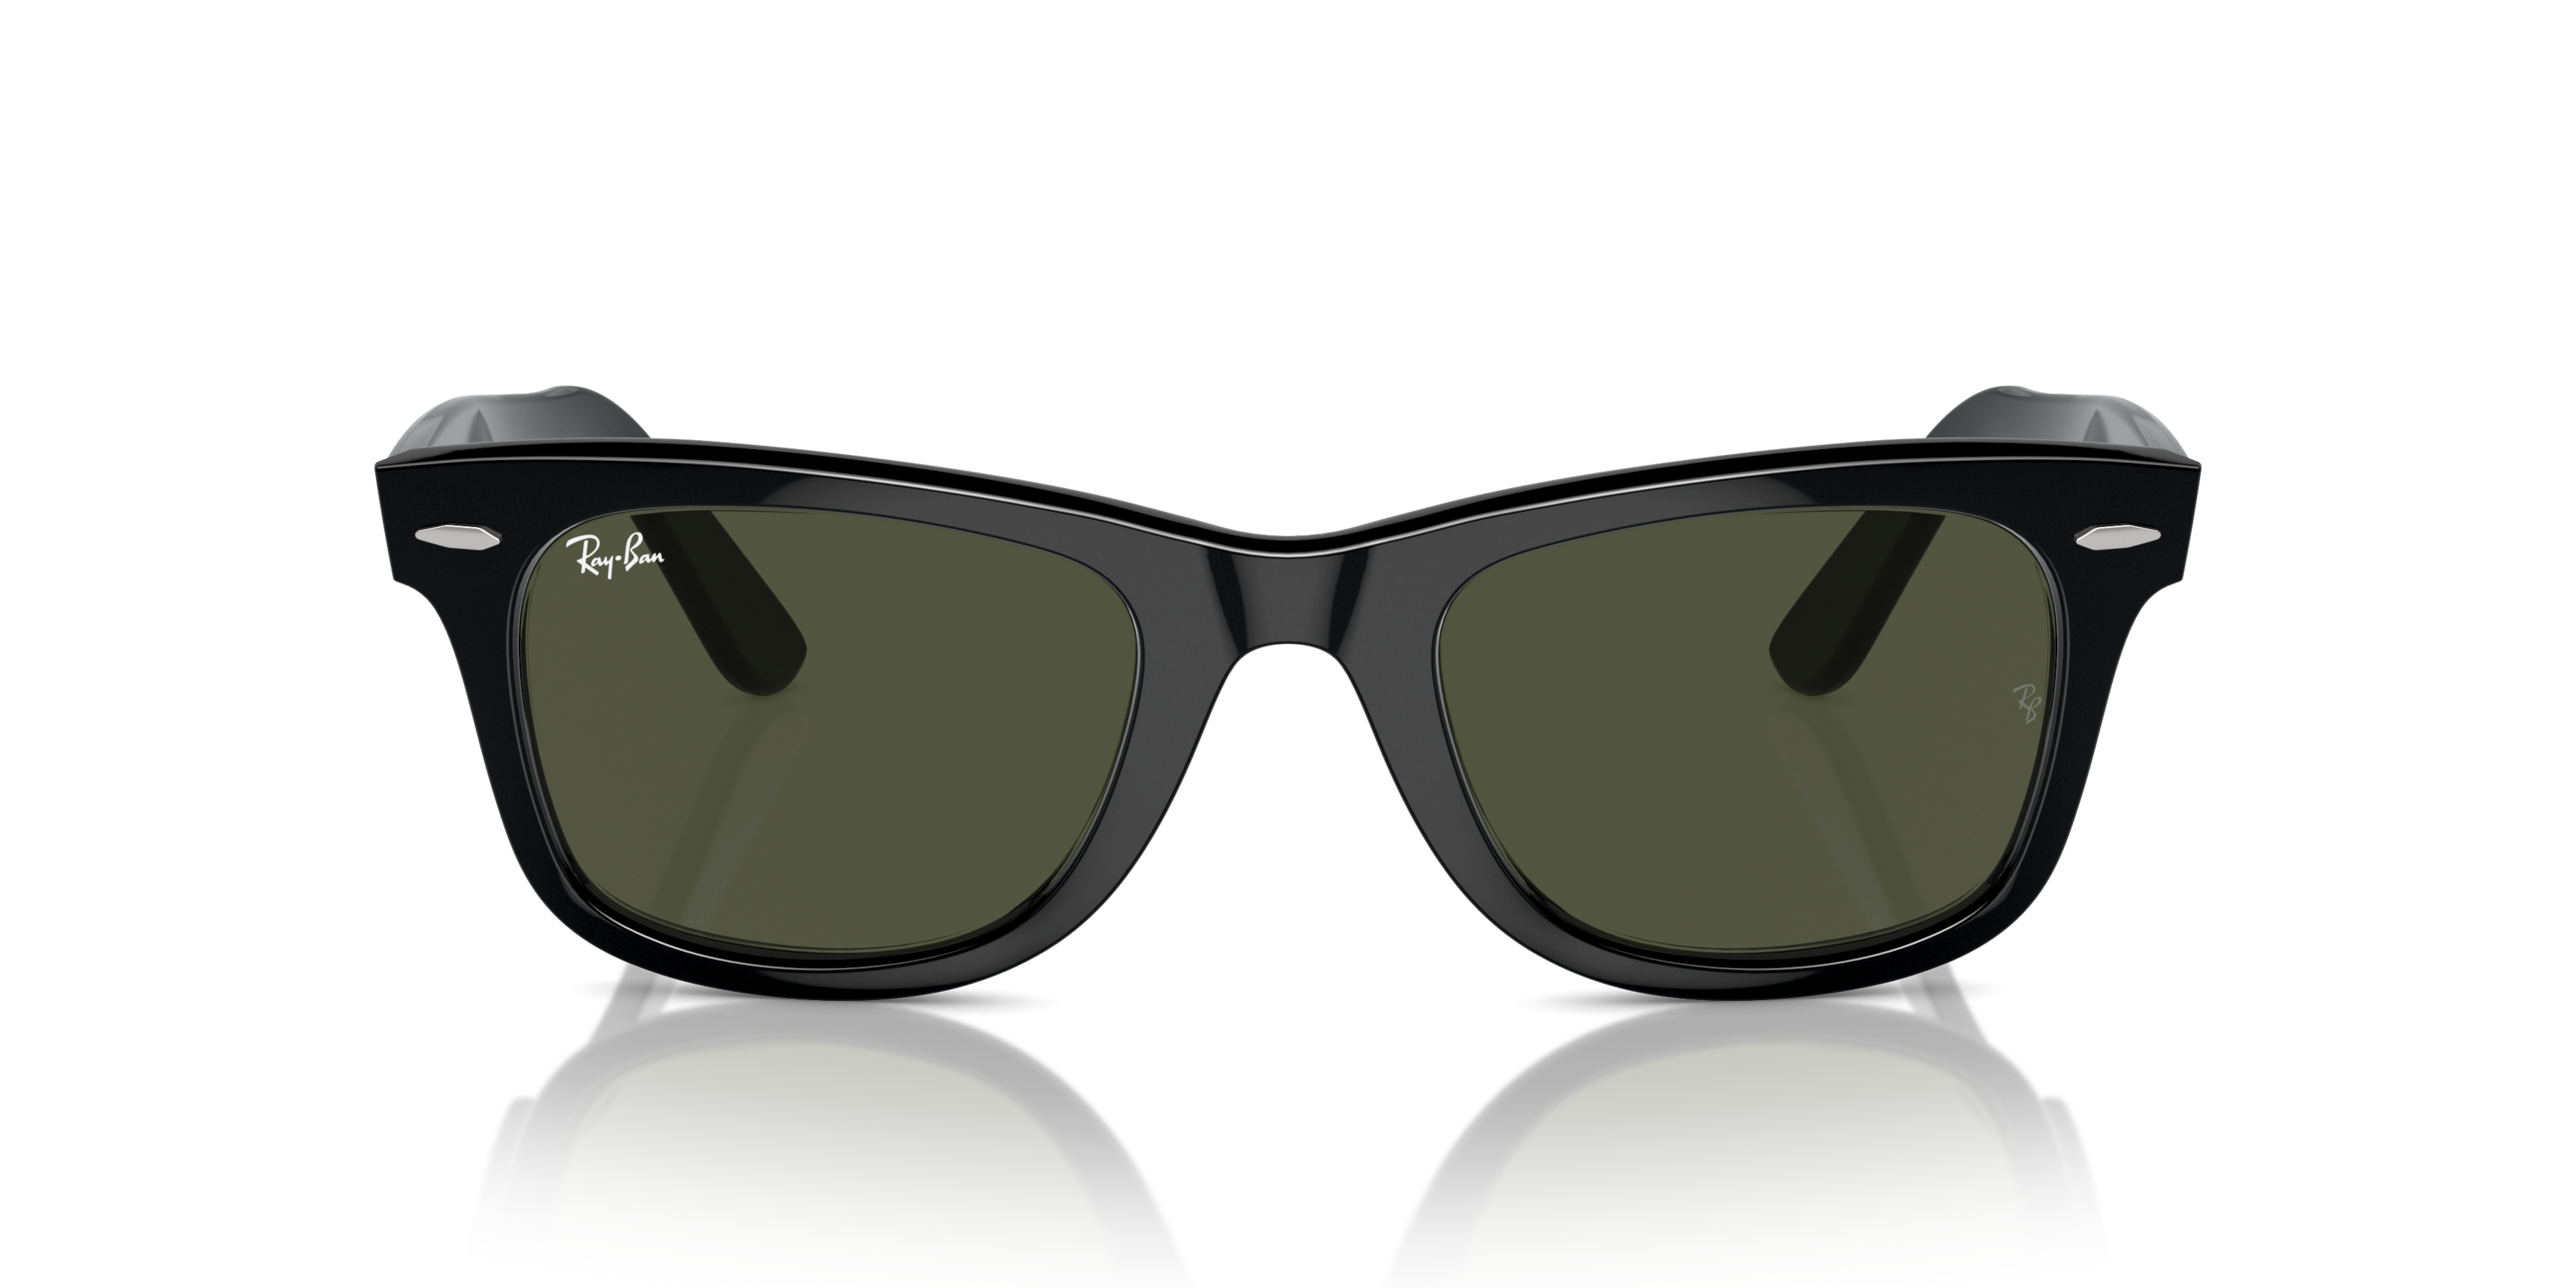 [products.image.front] Ray-Ban Wayfarer RB2140 901 50/22